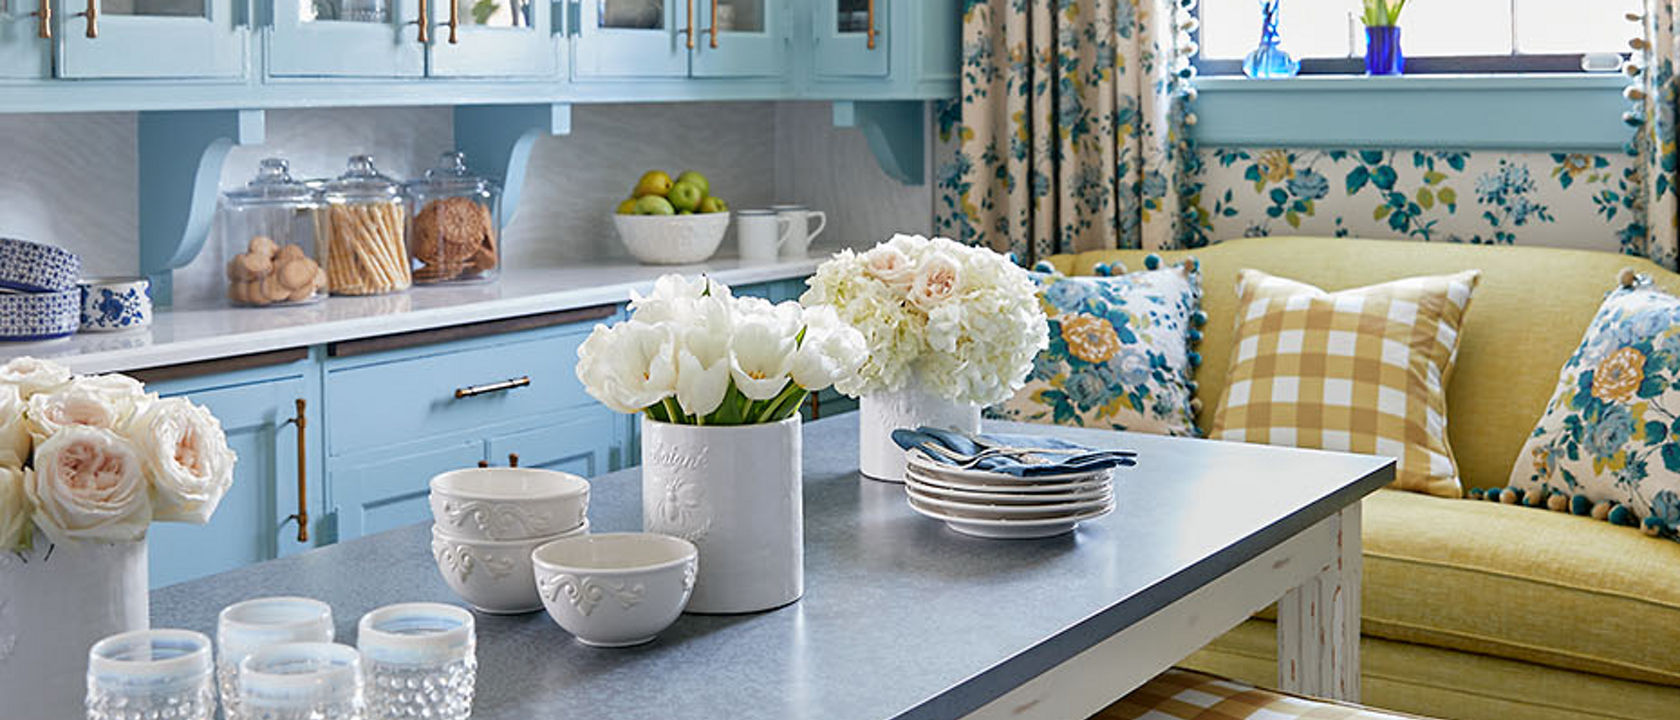 Space of the Week: This Family Kitchen Embraces a Timeless Color